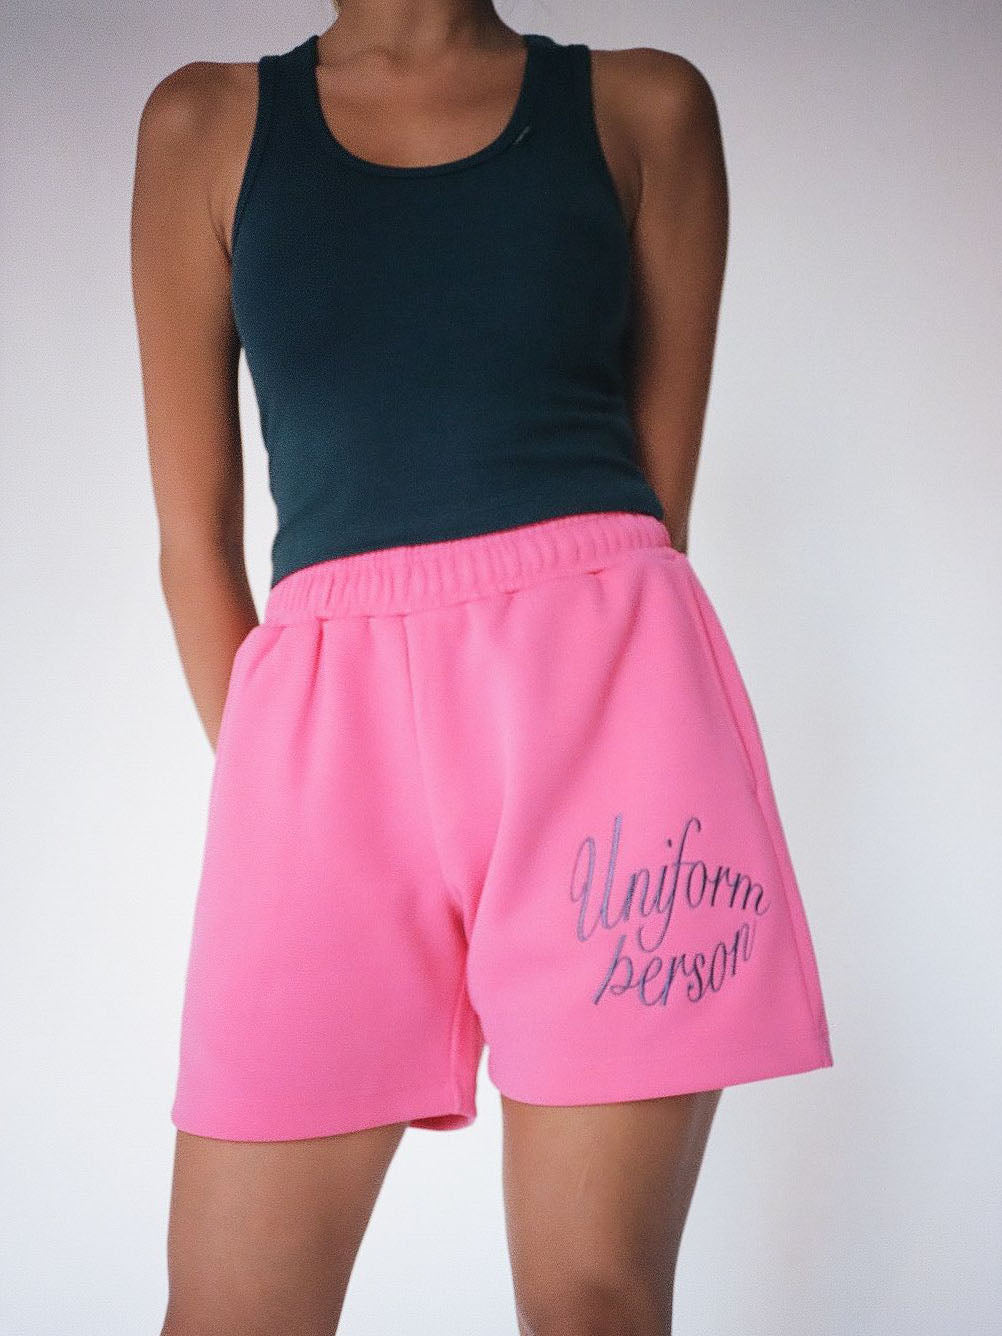 THE SHORTS - expensive pink